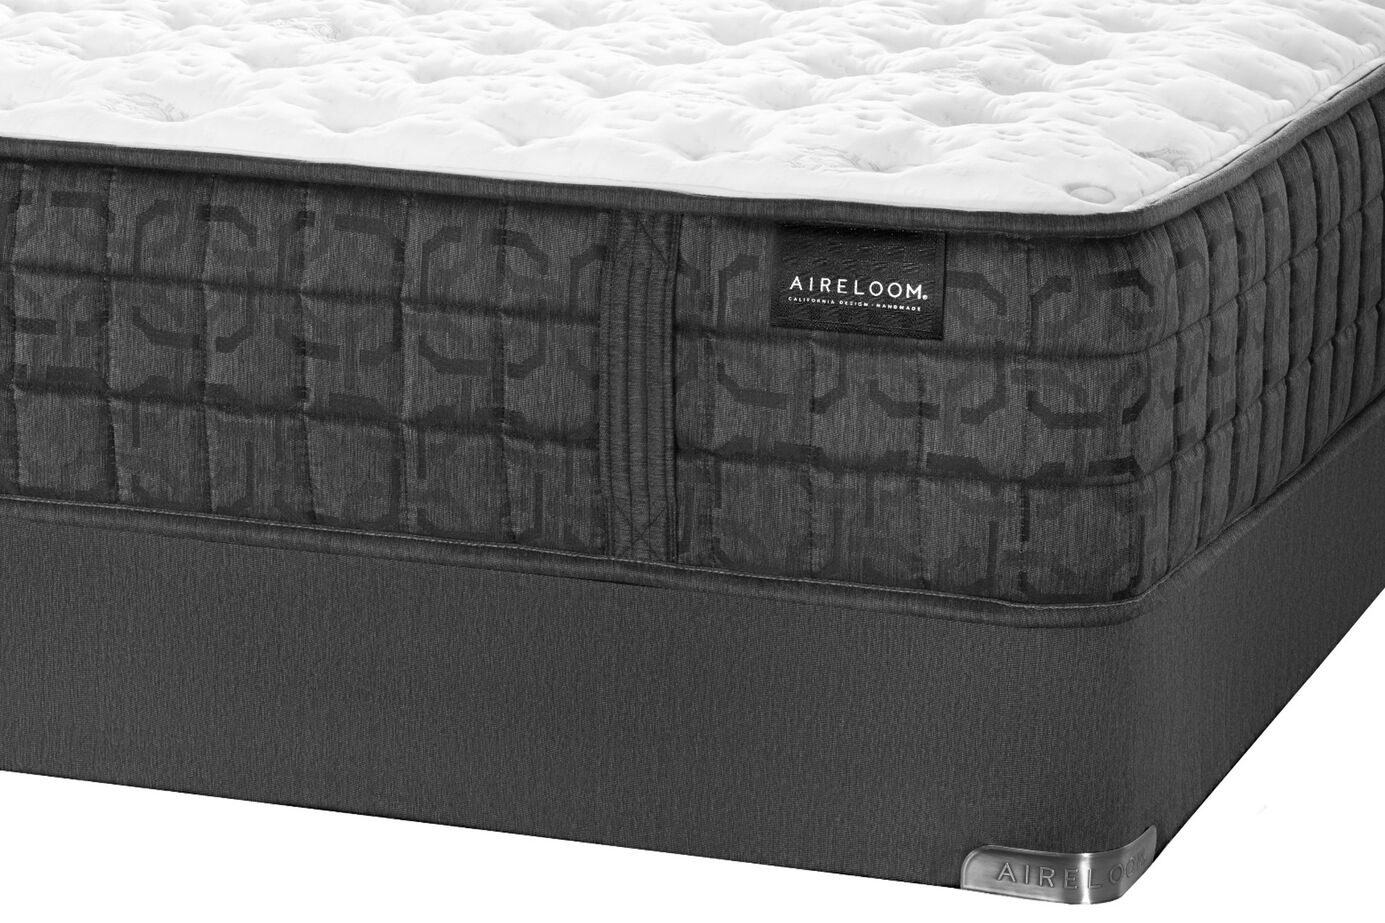 Aireloom Pacific Bay Gemini Firm Mattress 11.5" image number 3